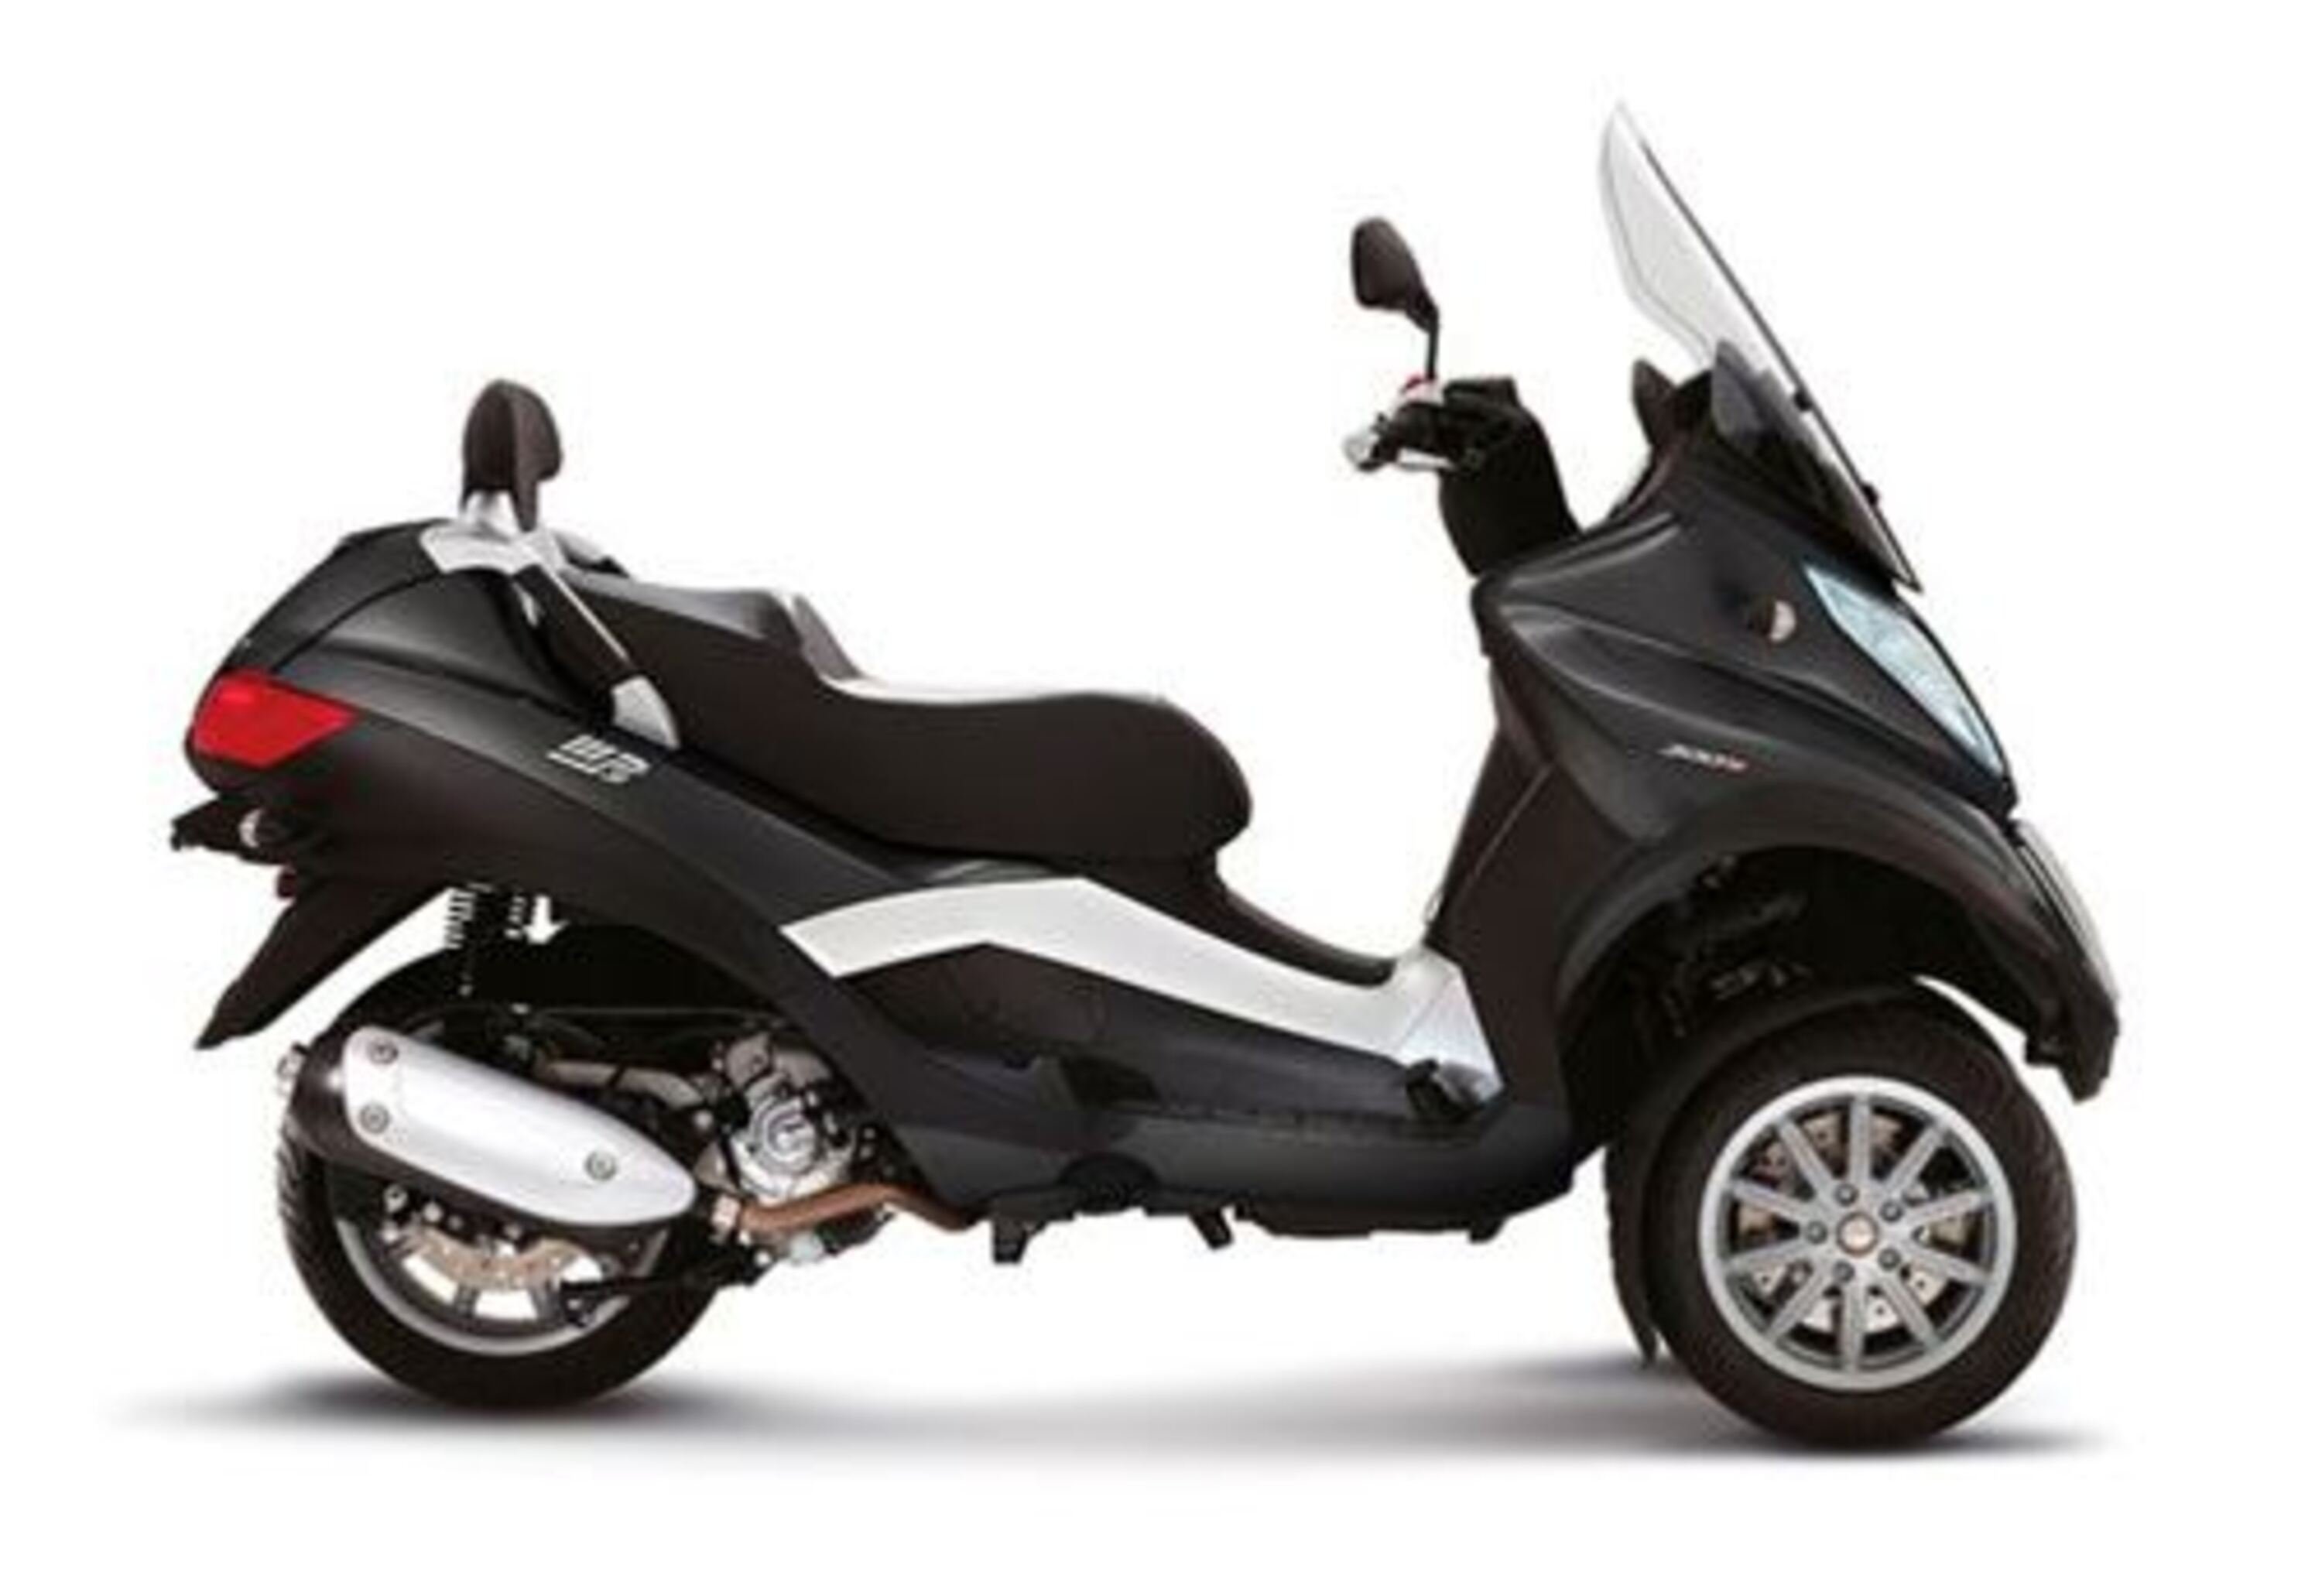 Piaggio MP3 MP3 500 ie Business LT ABS (2014 - 16)